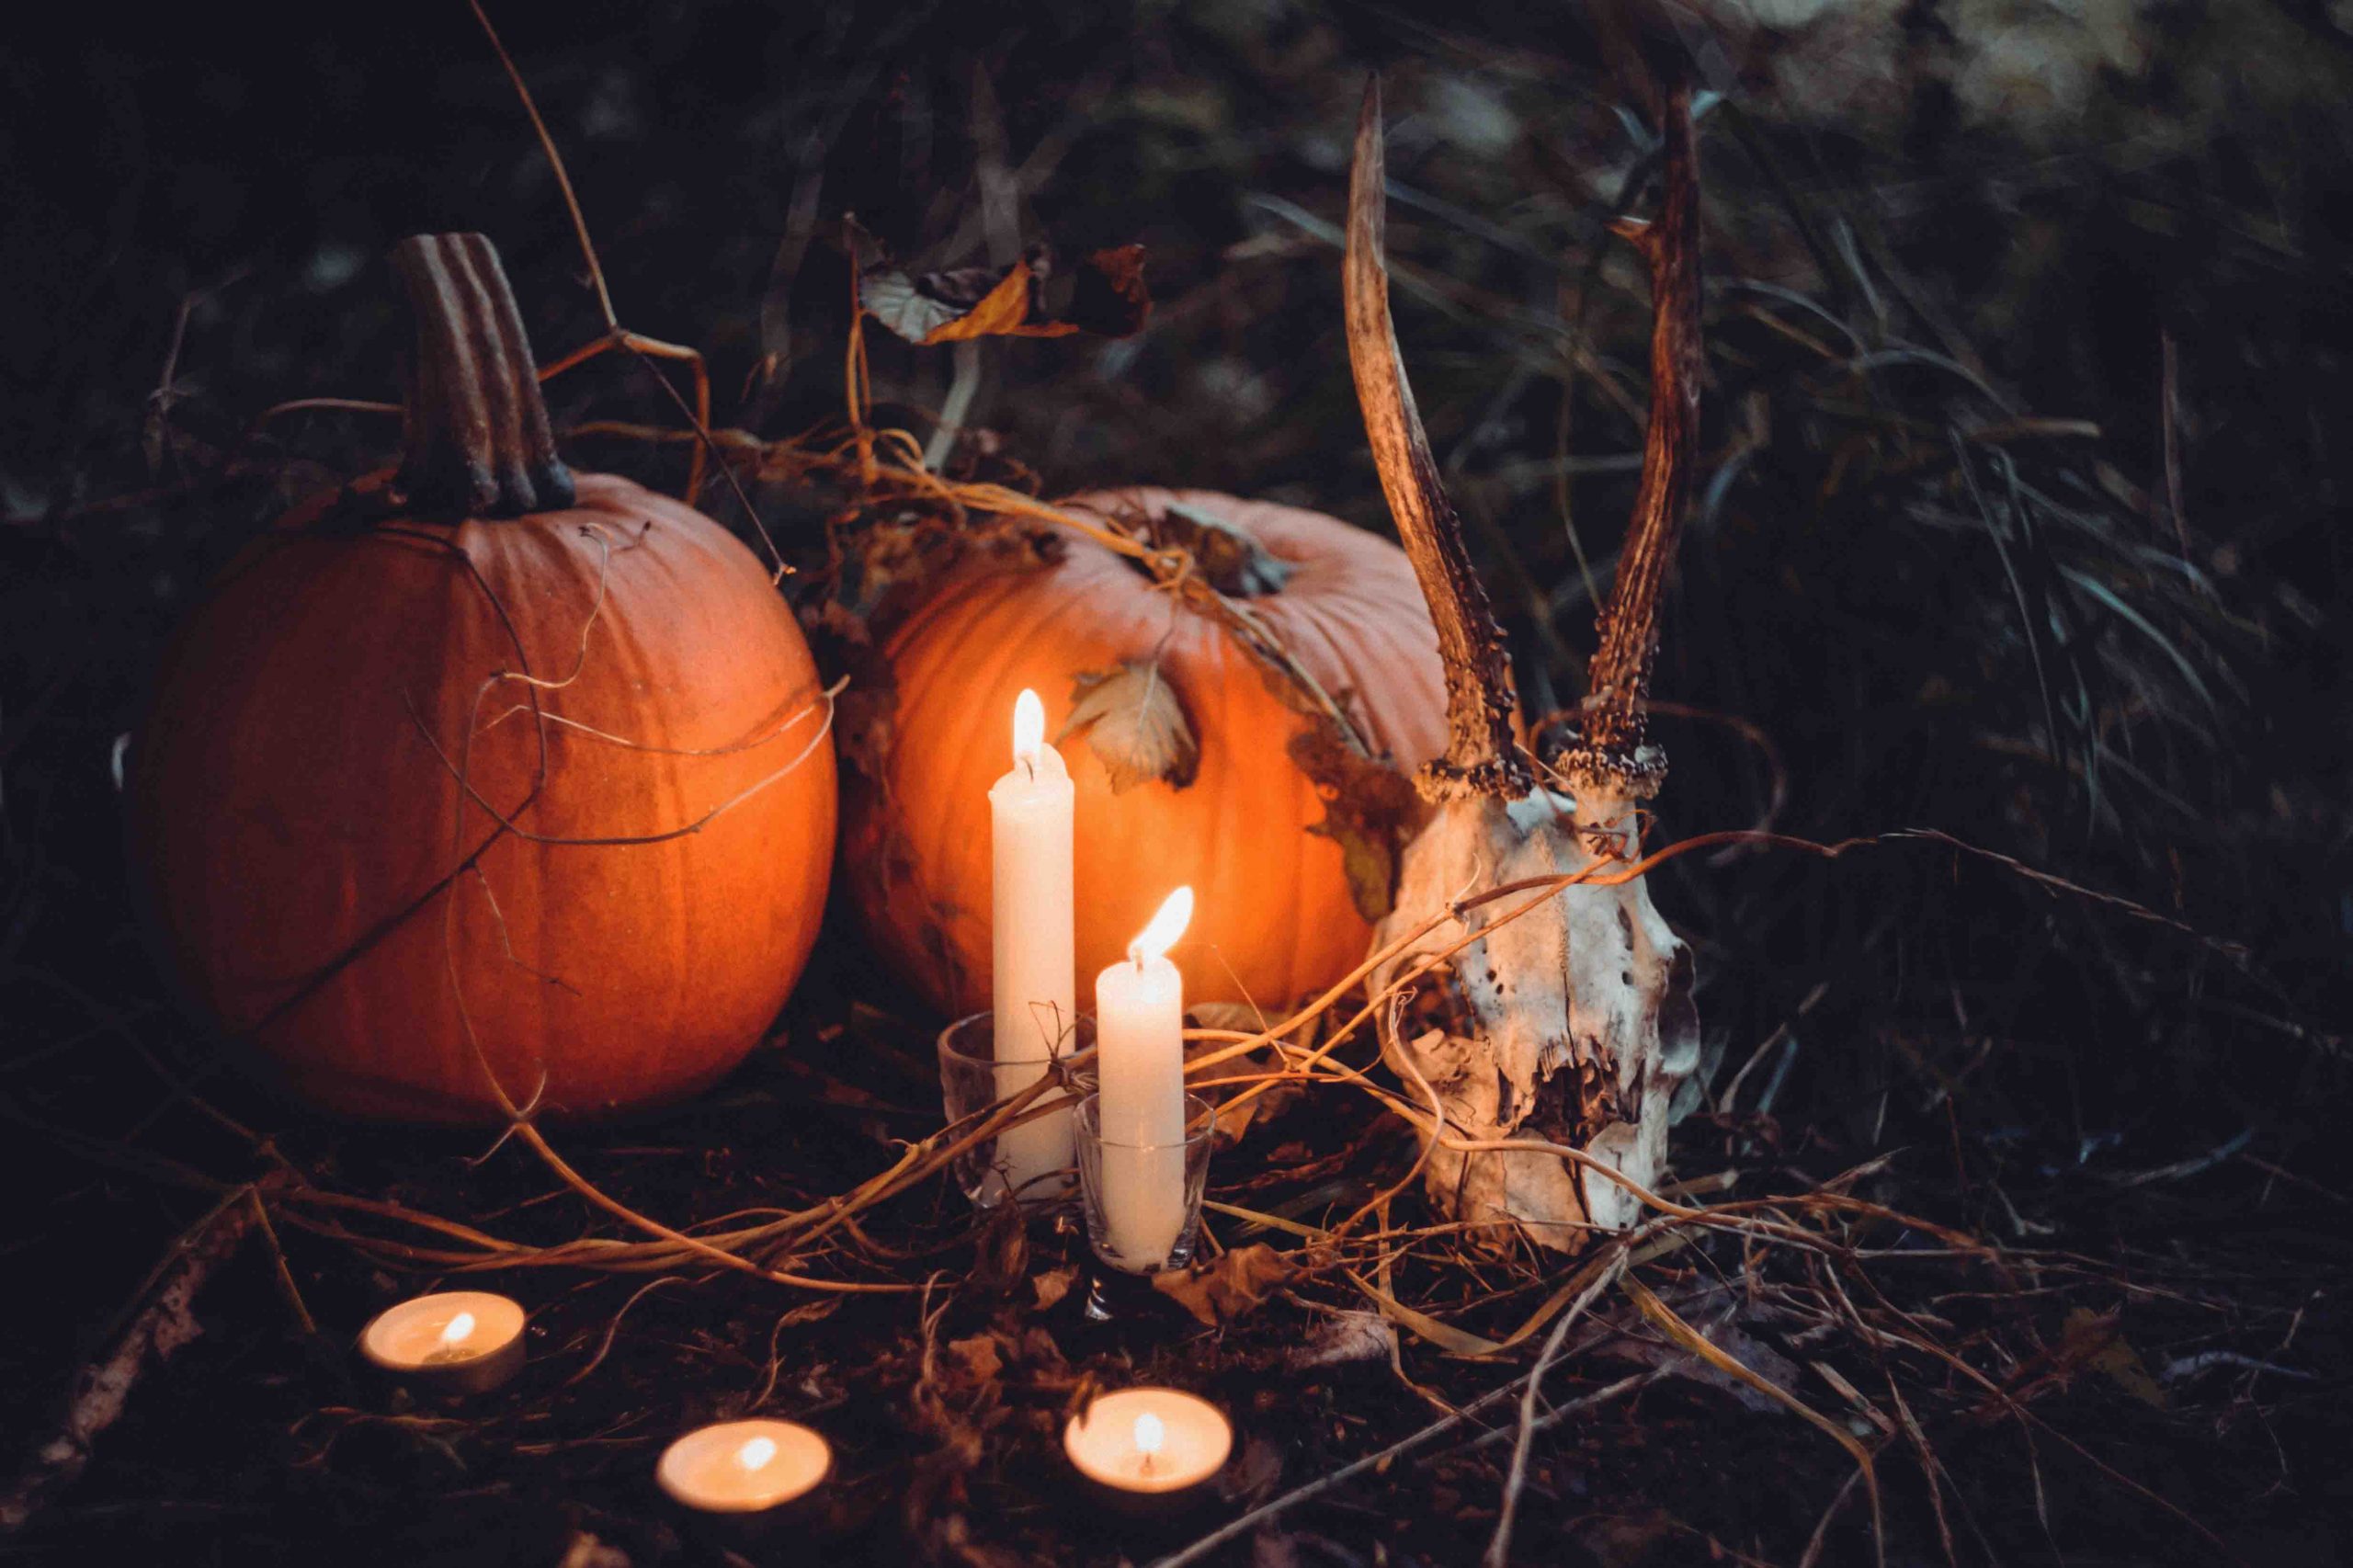 Utimate Guide to Celebrate Halloween with Kids